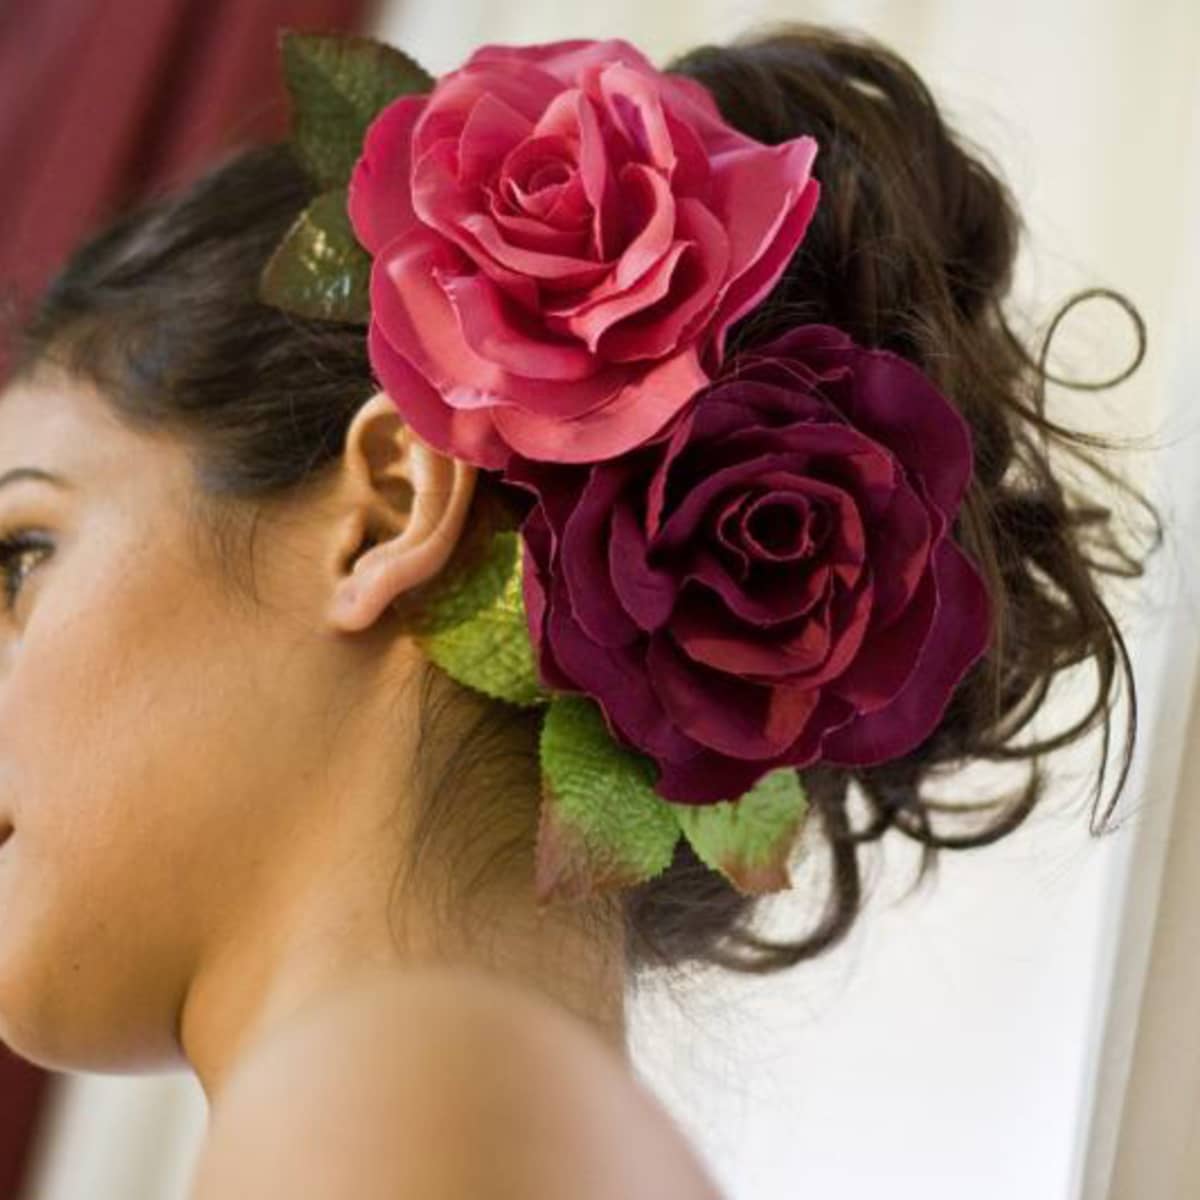 Detail of Hairstyle Earrings of Young Woman Flamenco Artist Brunette  with Typical Black Flamenco Dance Suit and Red Carnations Stock Photo   Image of black dots 233273228